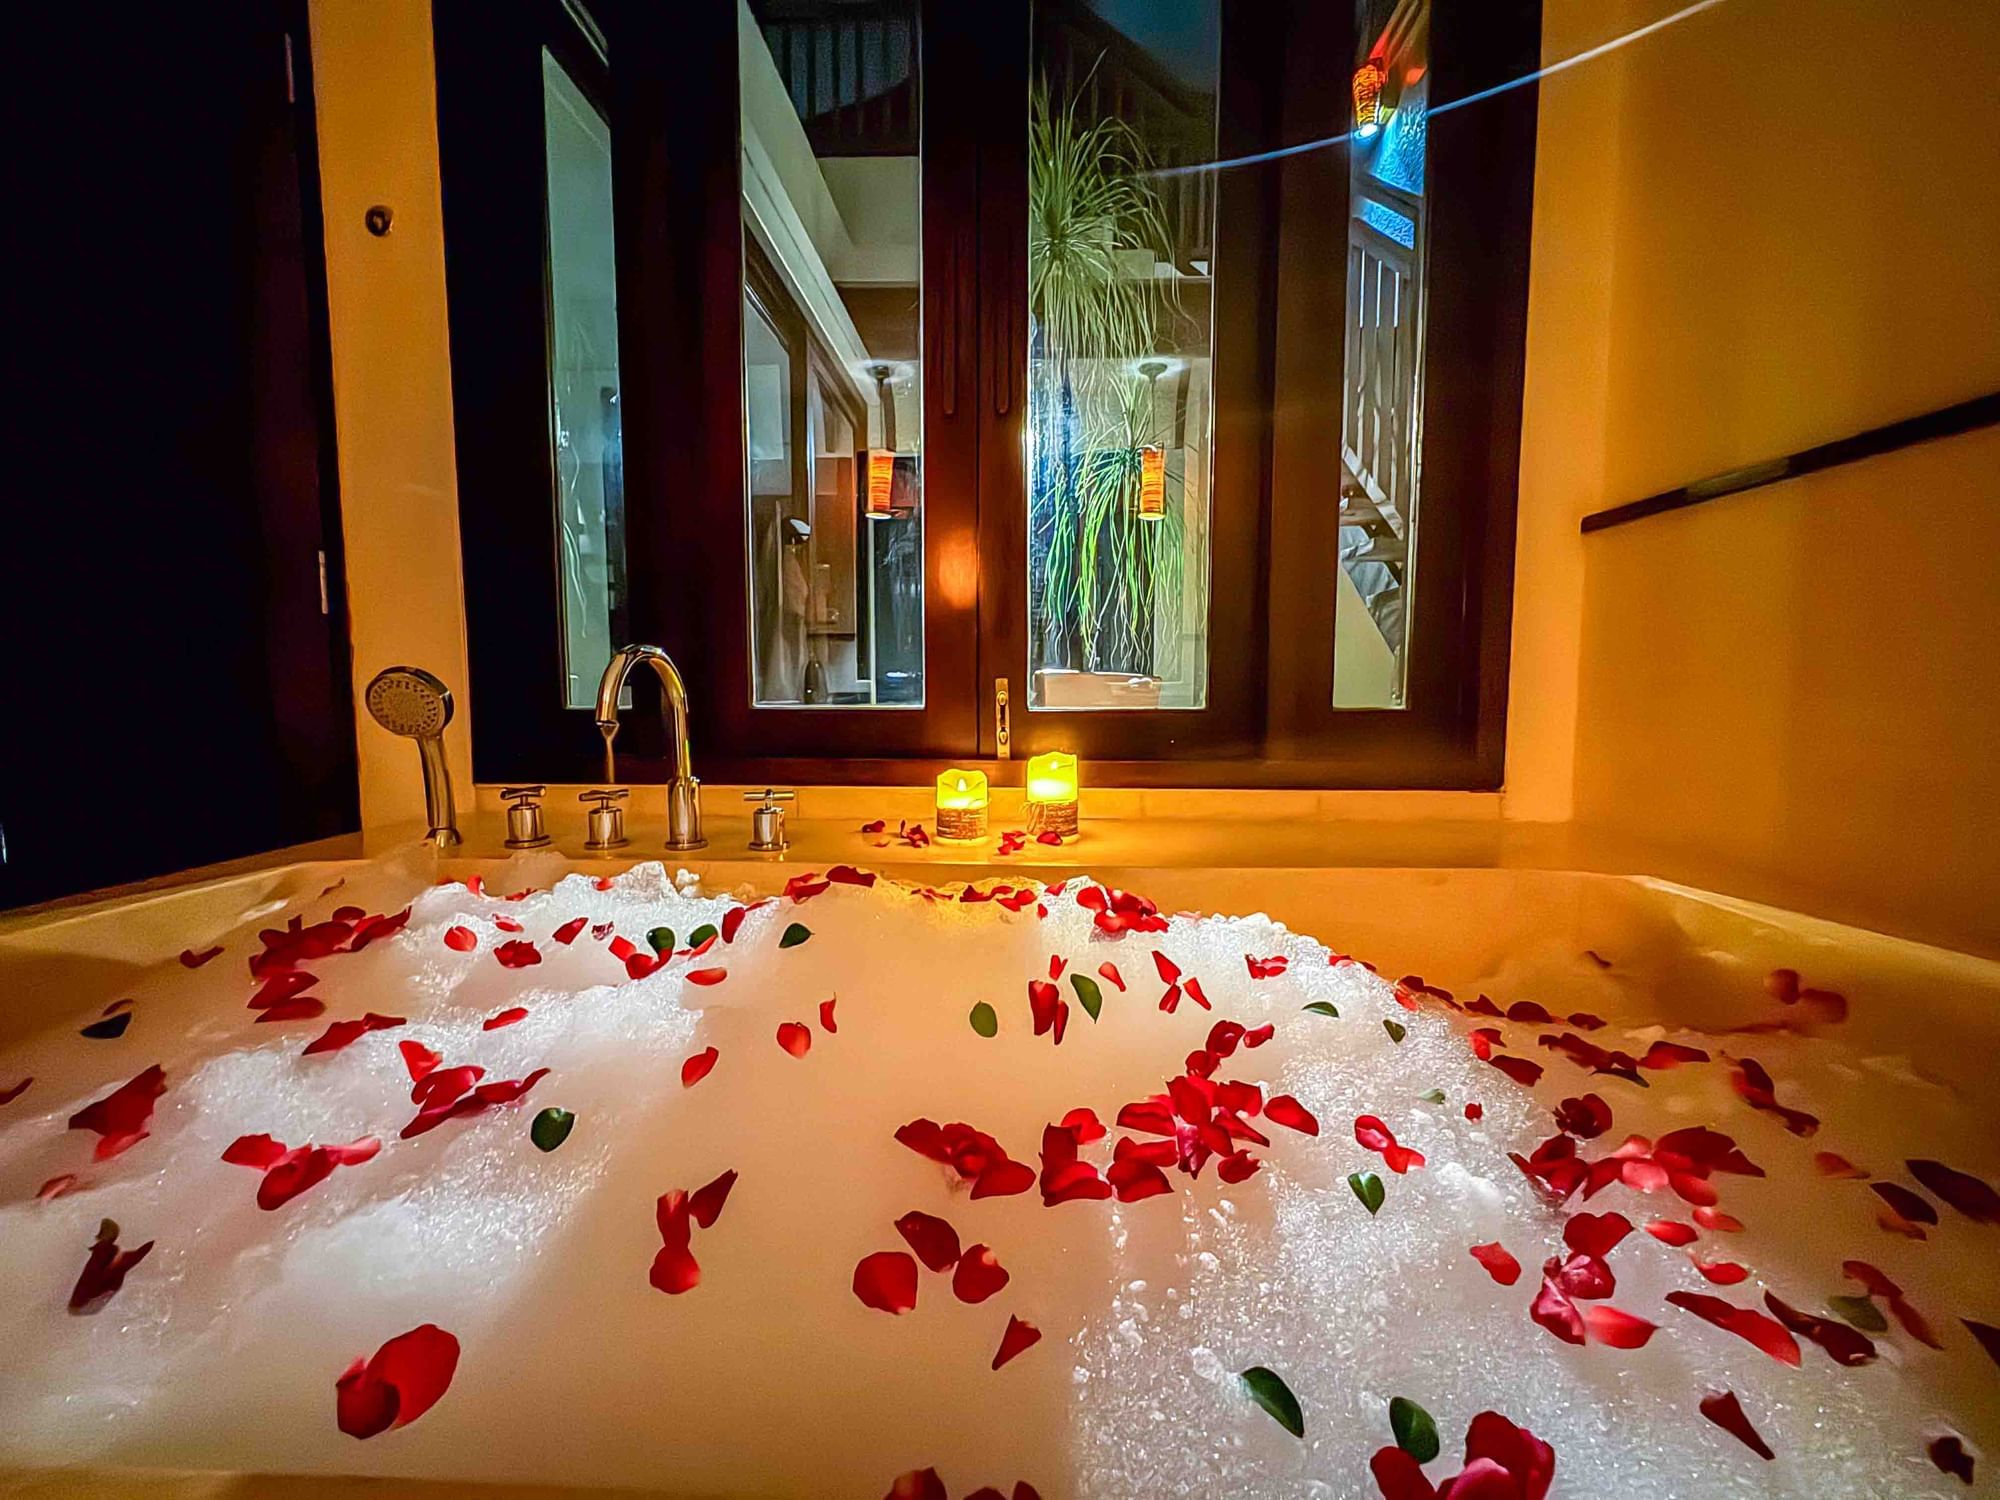 Bathtub decoration with roses and candles